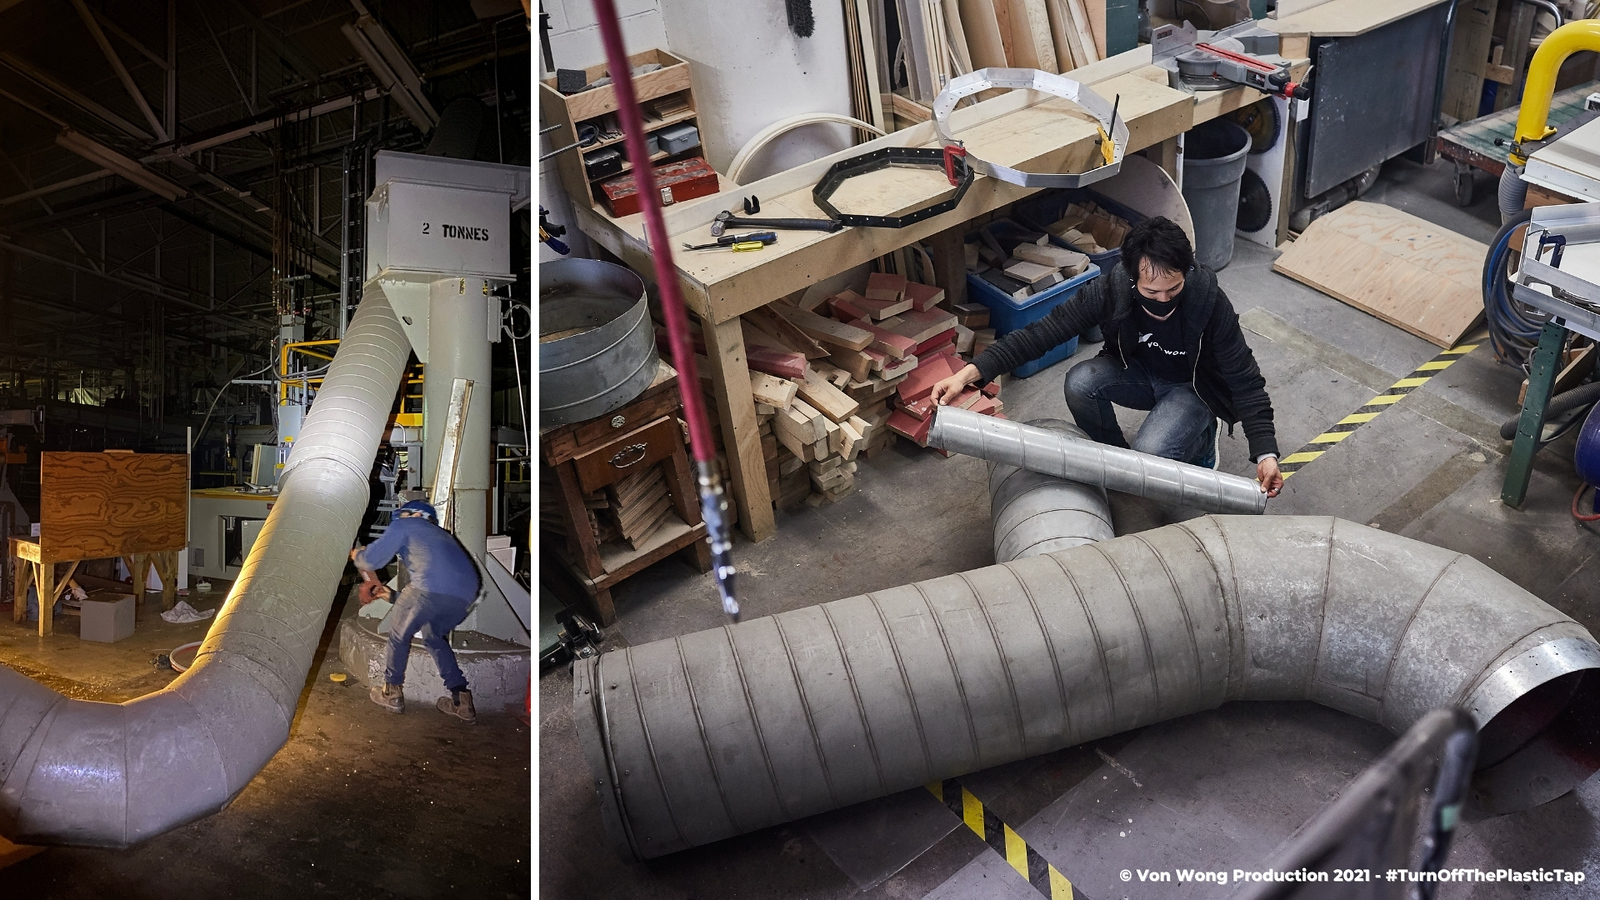 A collage of photos shows Benjamin Von Wong (pic on the right) working with used ventilation ducts to create the “faucet” part for his ‘Turn off The Plastic Tap’ project. Photo courtesy of Von Wong.